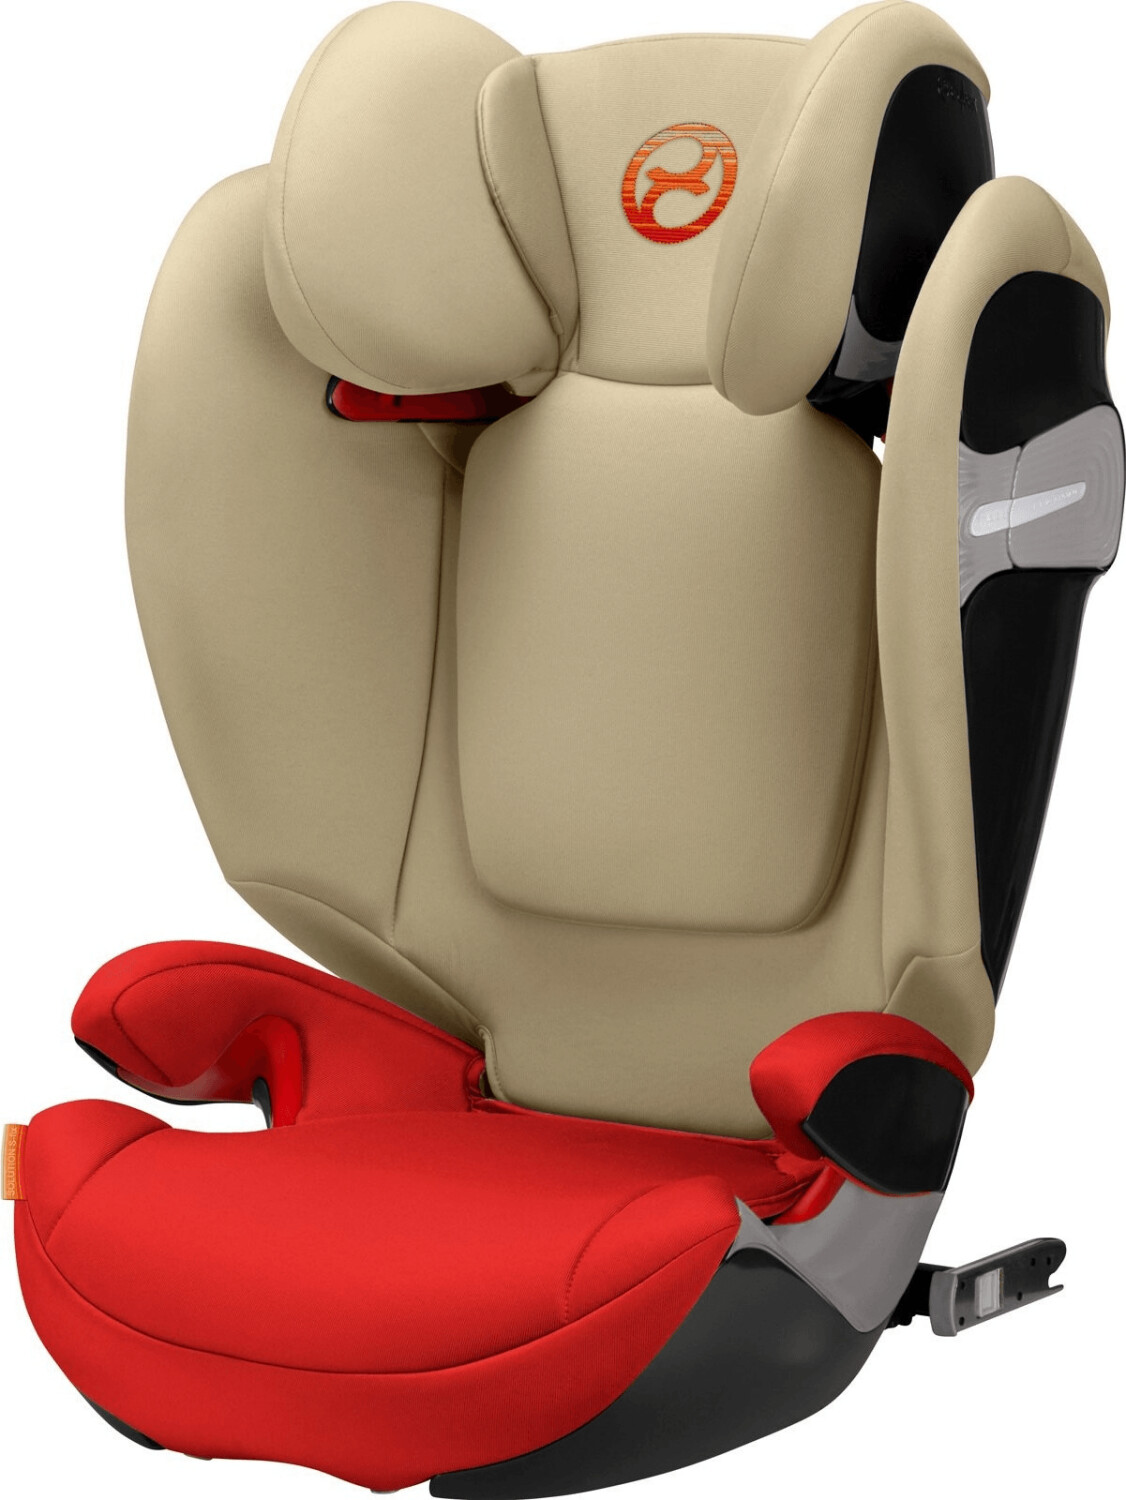 Cybex child seat Solution G i-Fix Autumn Gold | Burnt Red